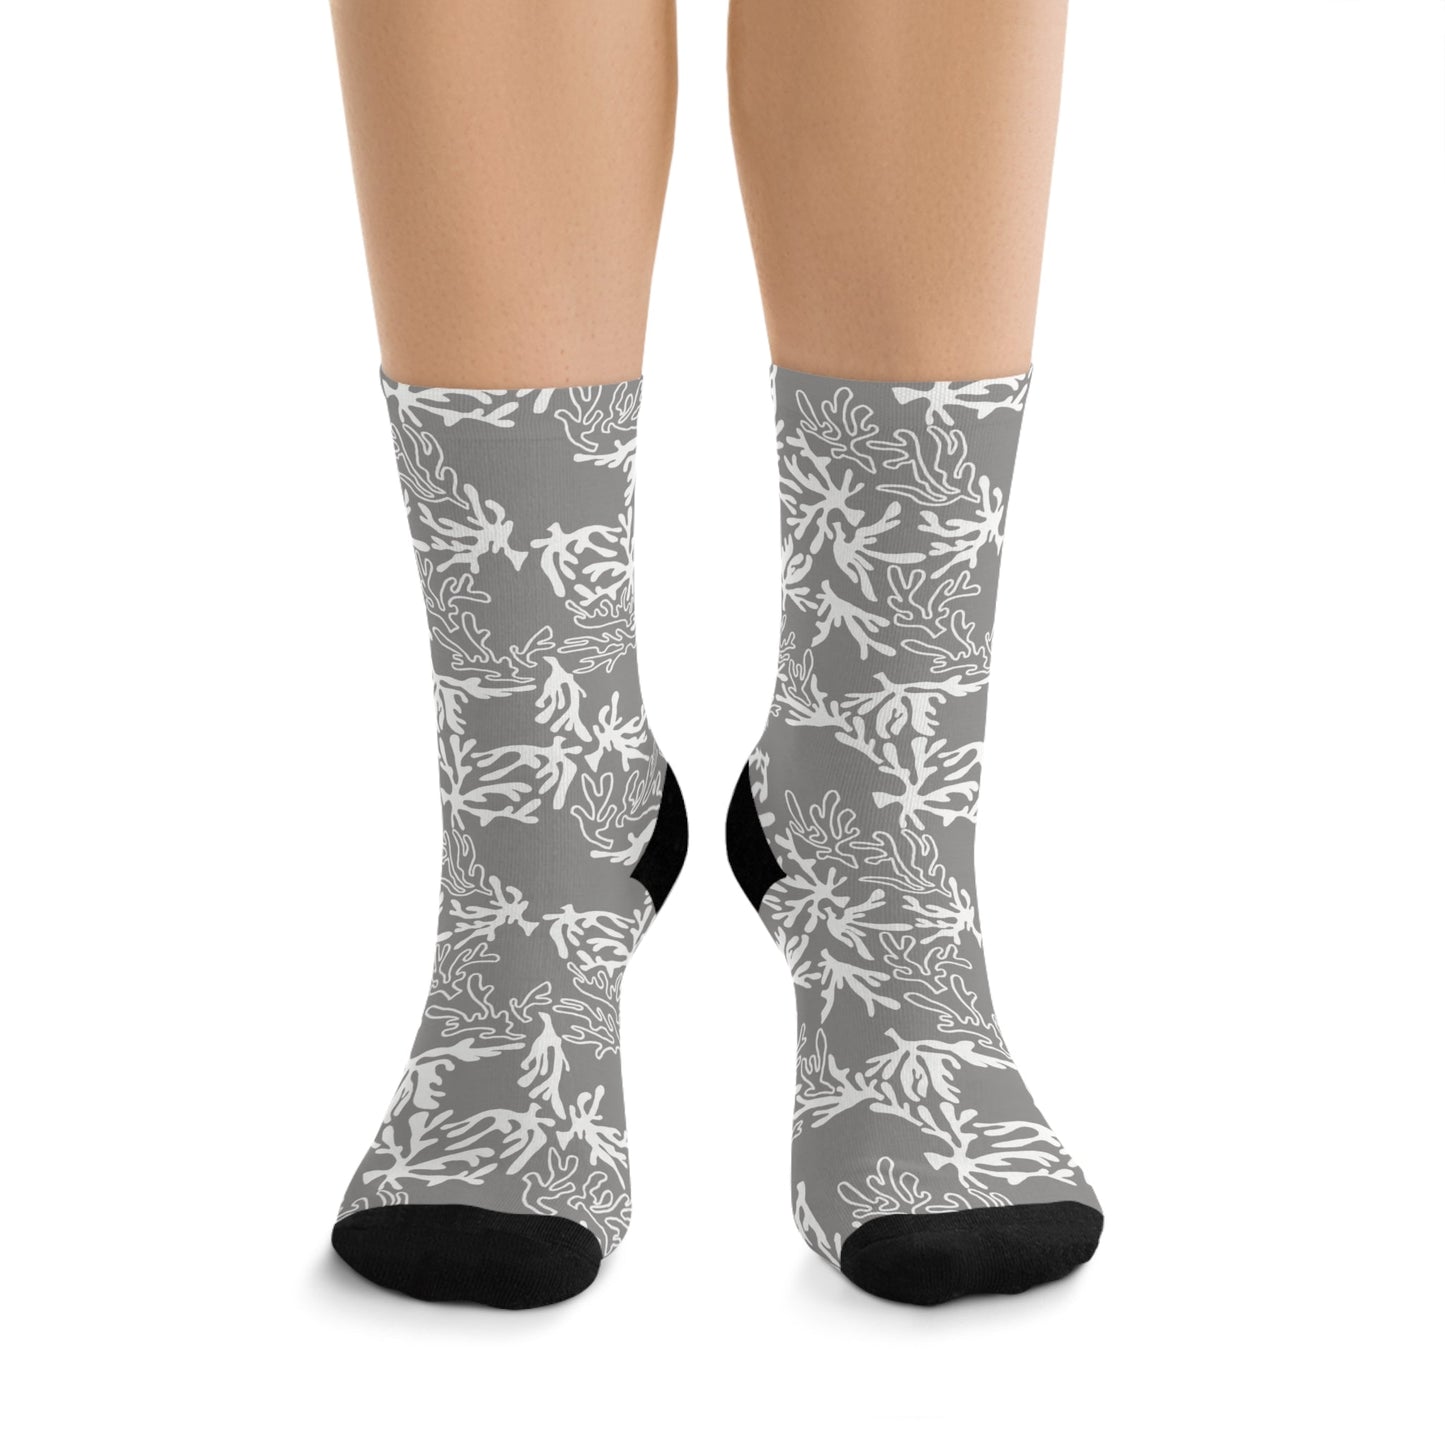 Recycled Poly Socks Coral Sharkskin Grey - Global Village Kailua Boutique